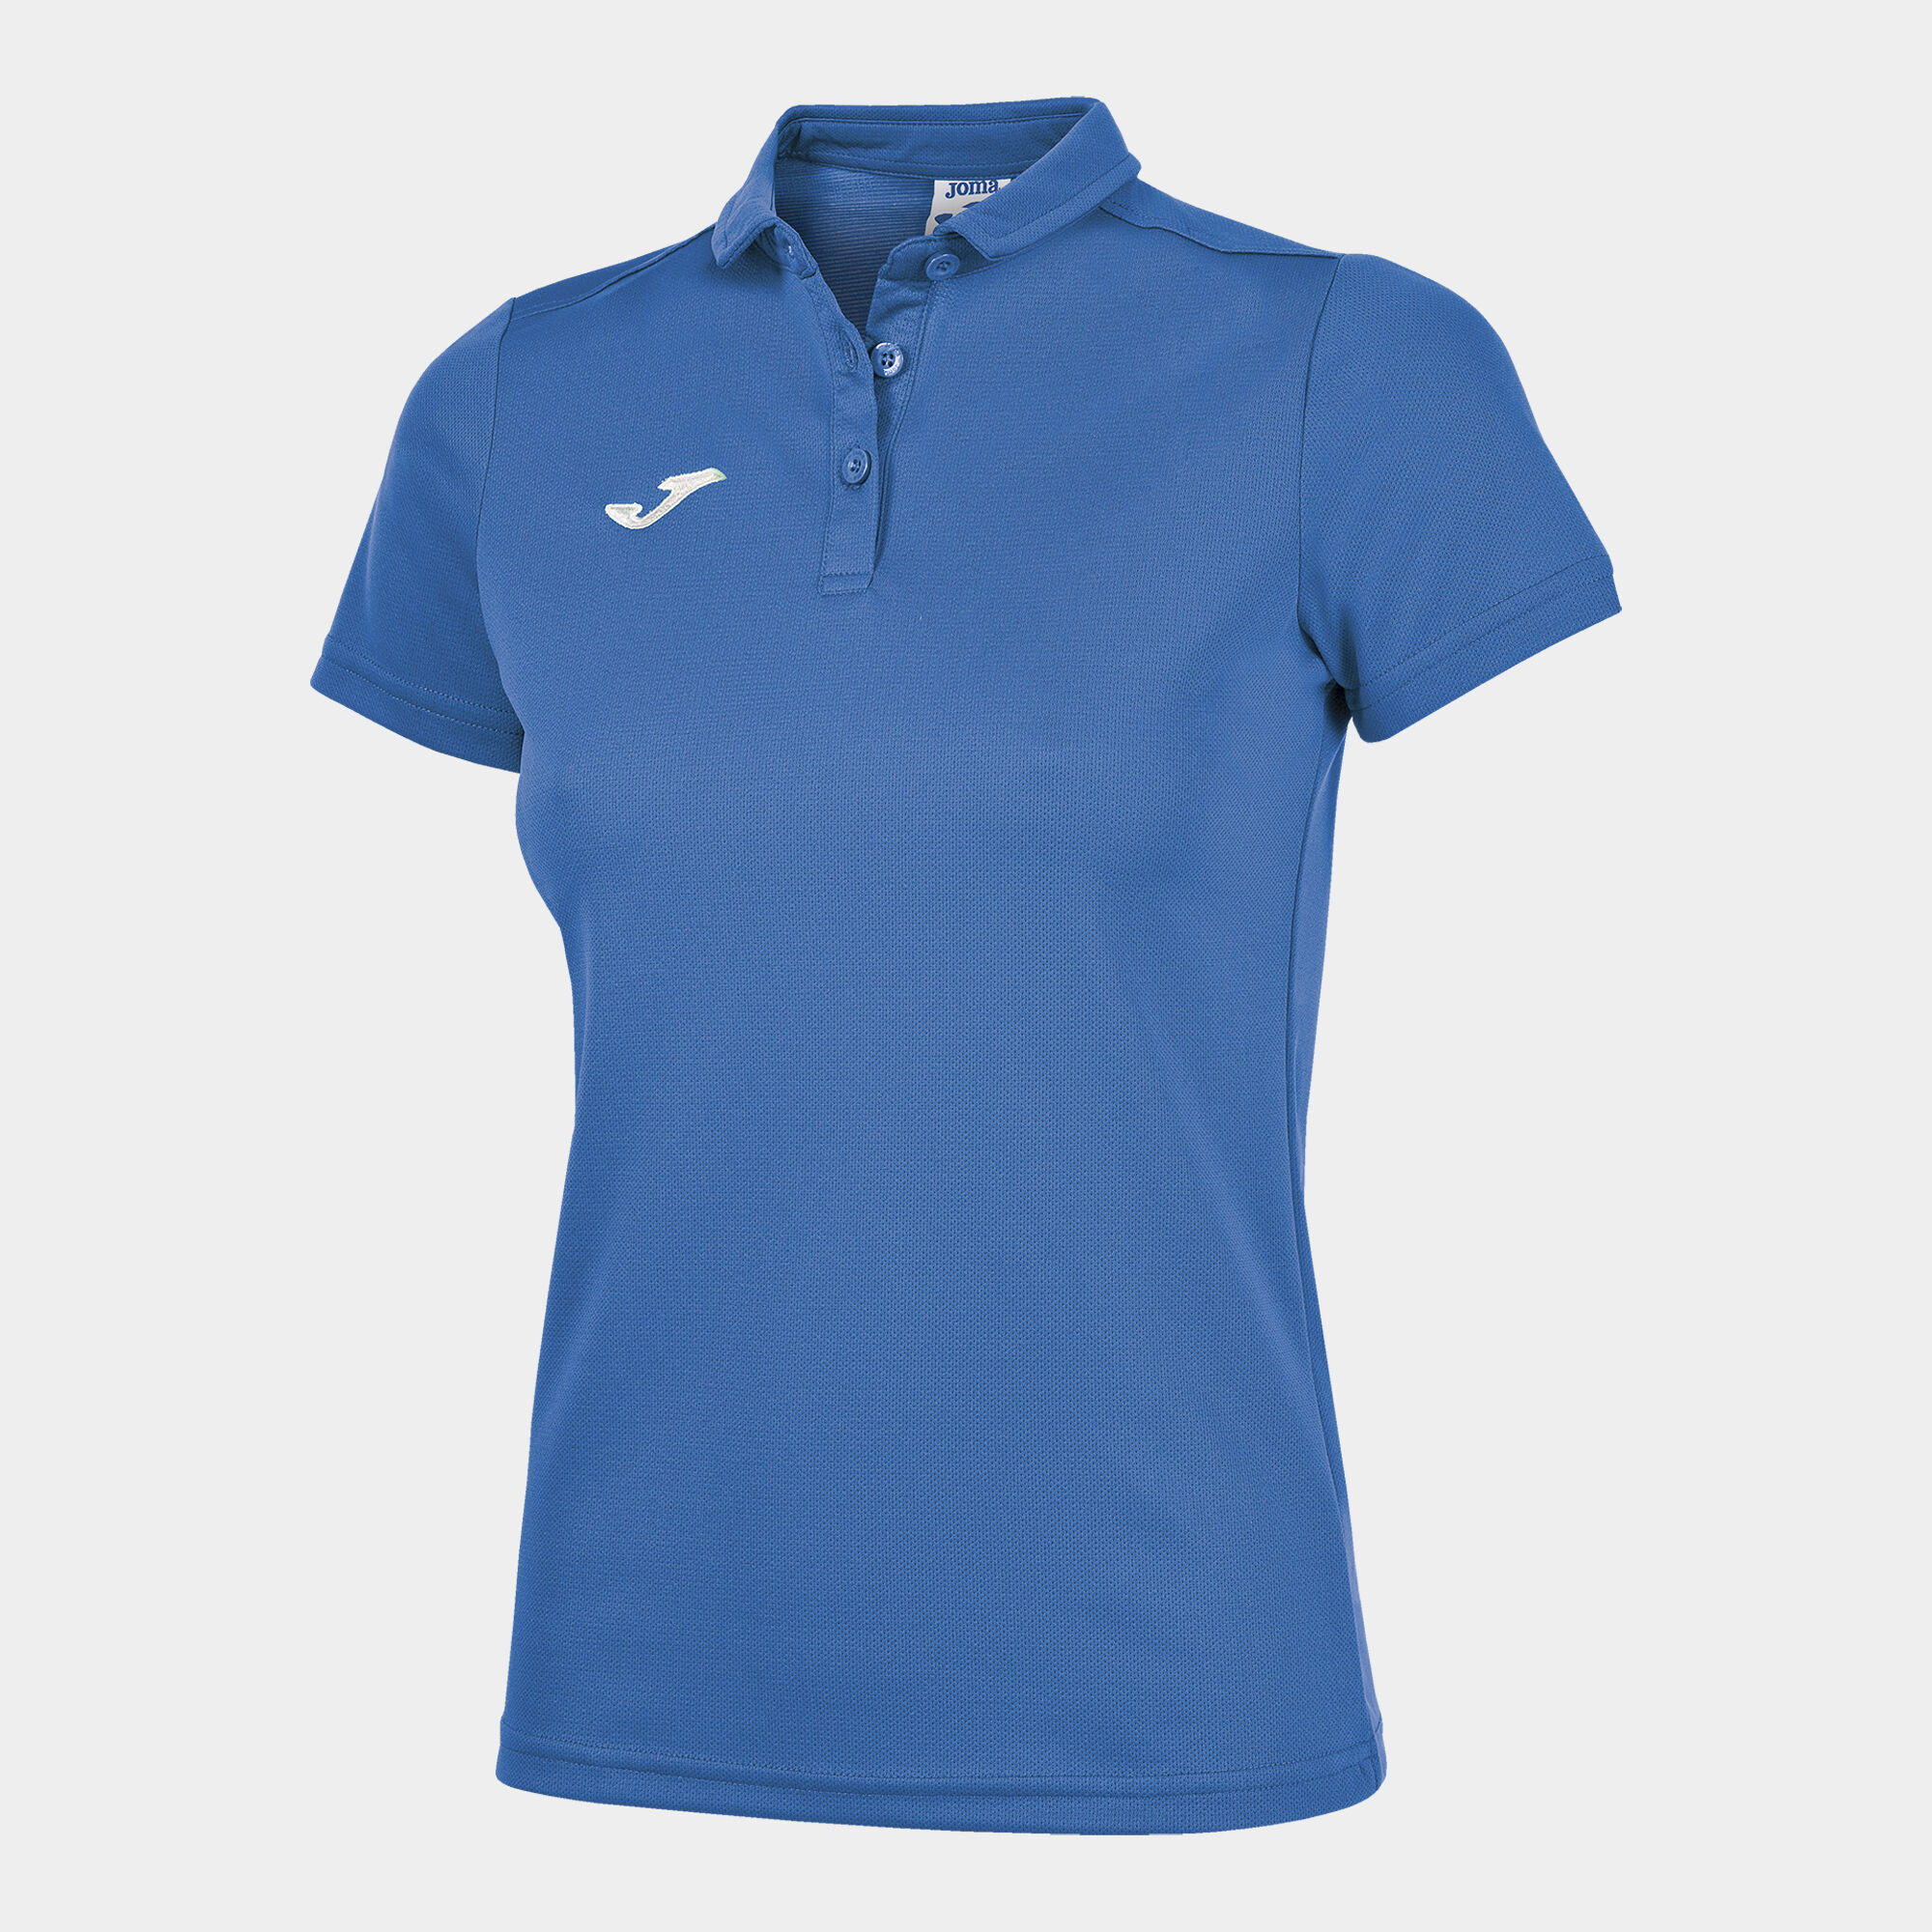 POLO M/C DONNA HOBBY BLU REALE